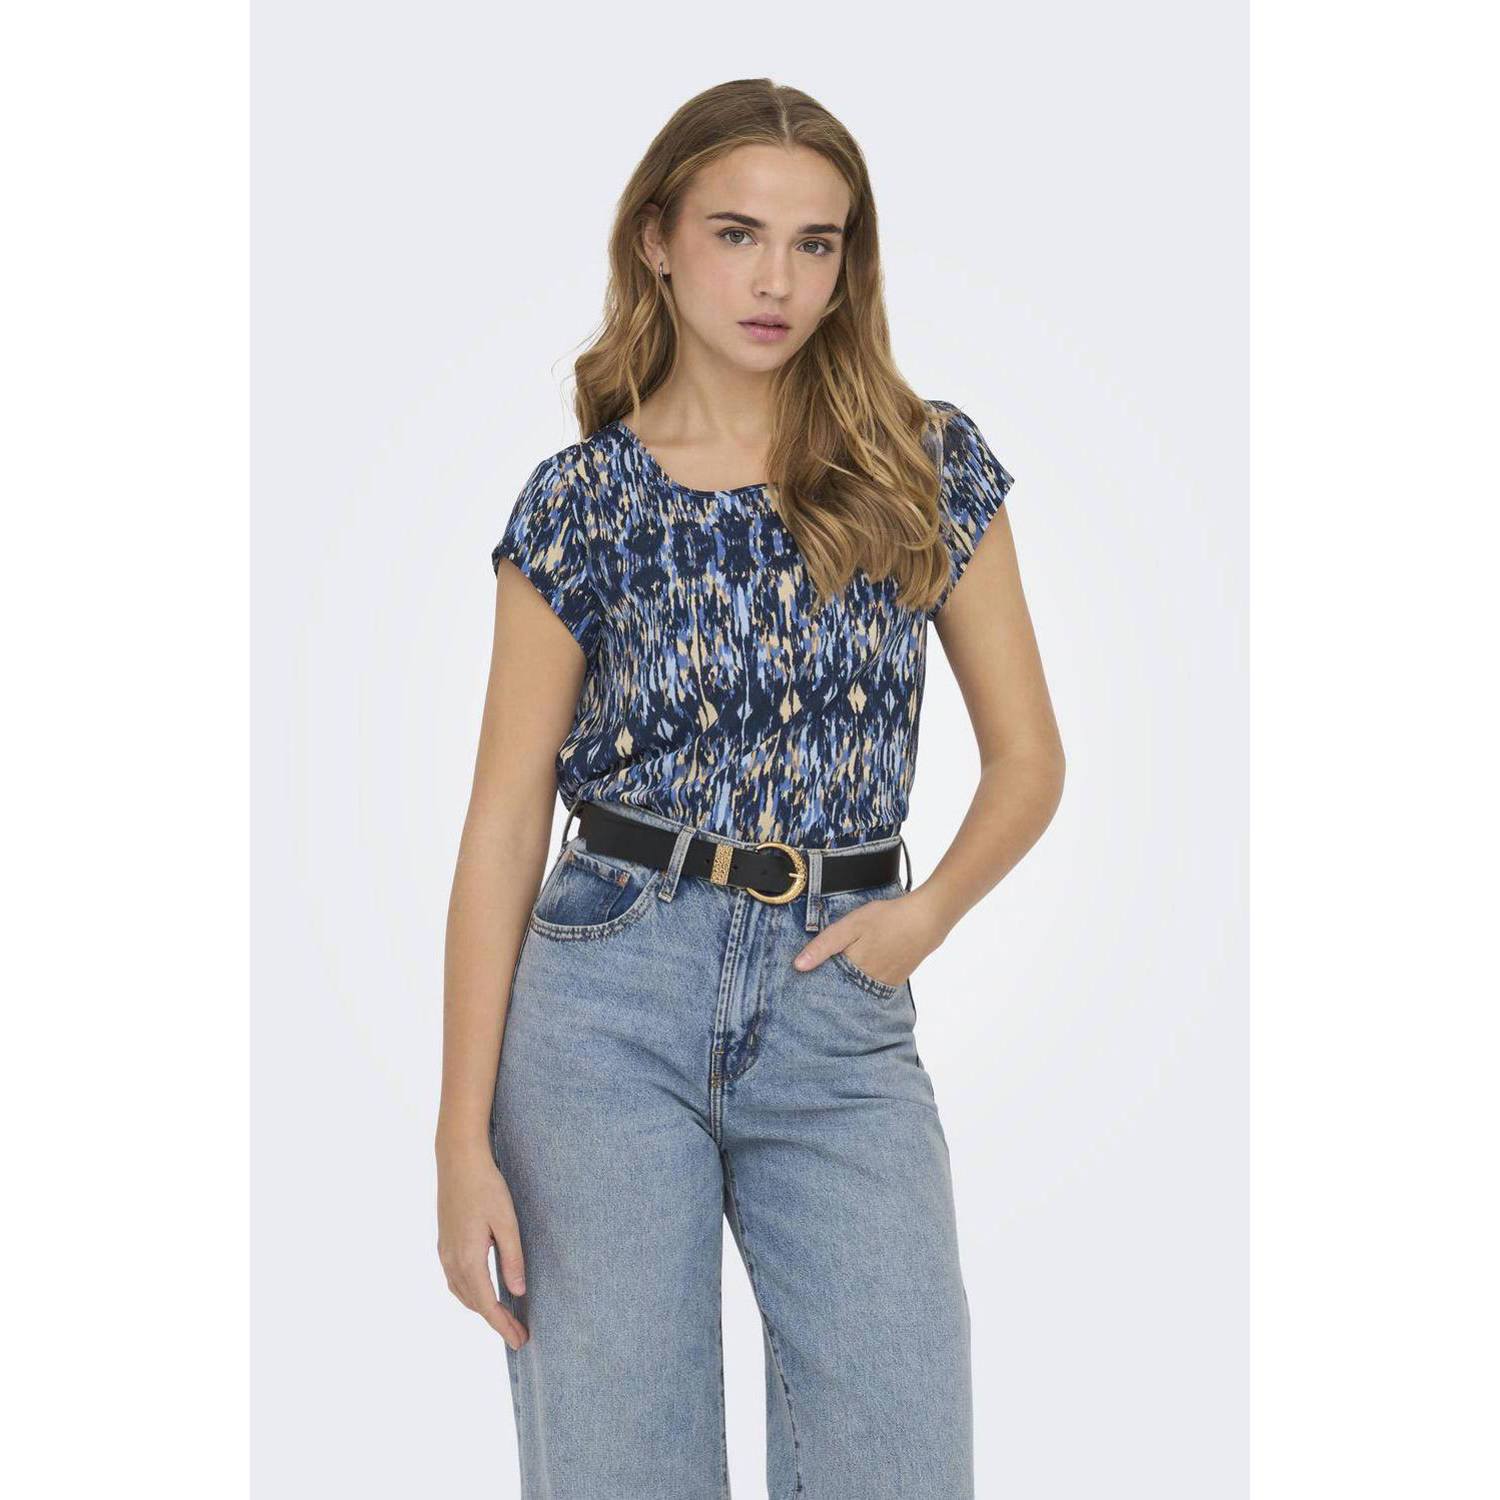 ONLY top met all over print blauw multi